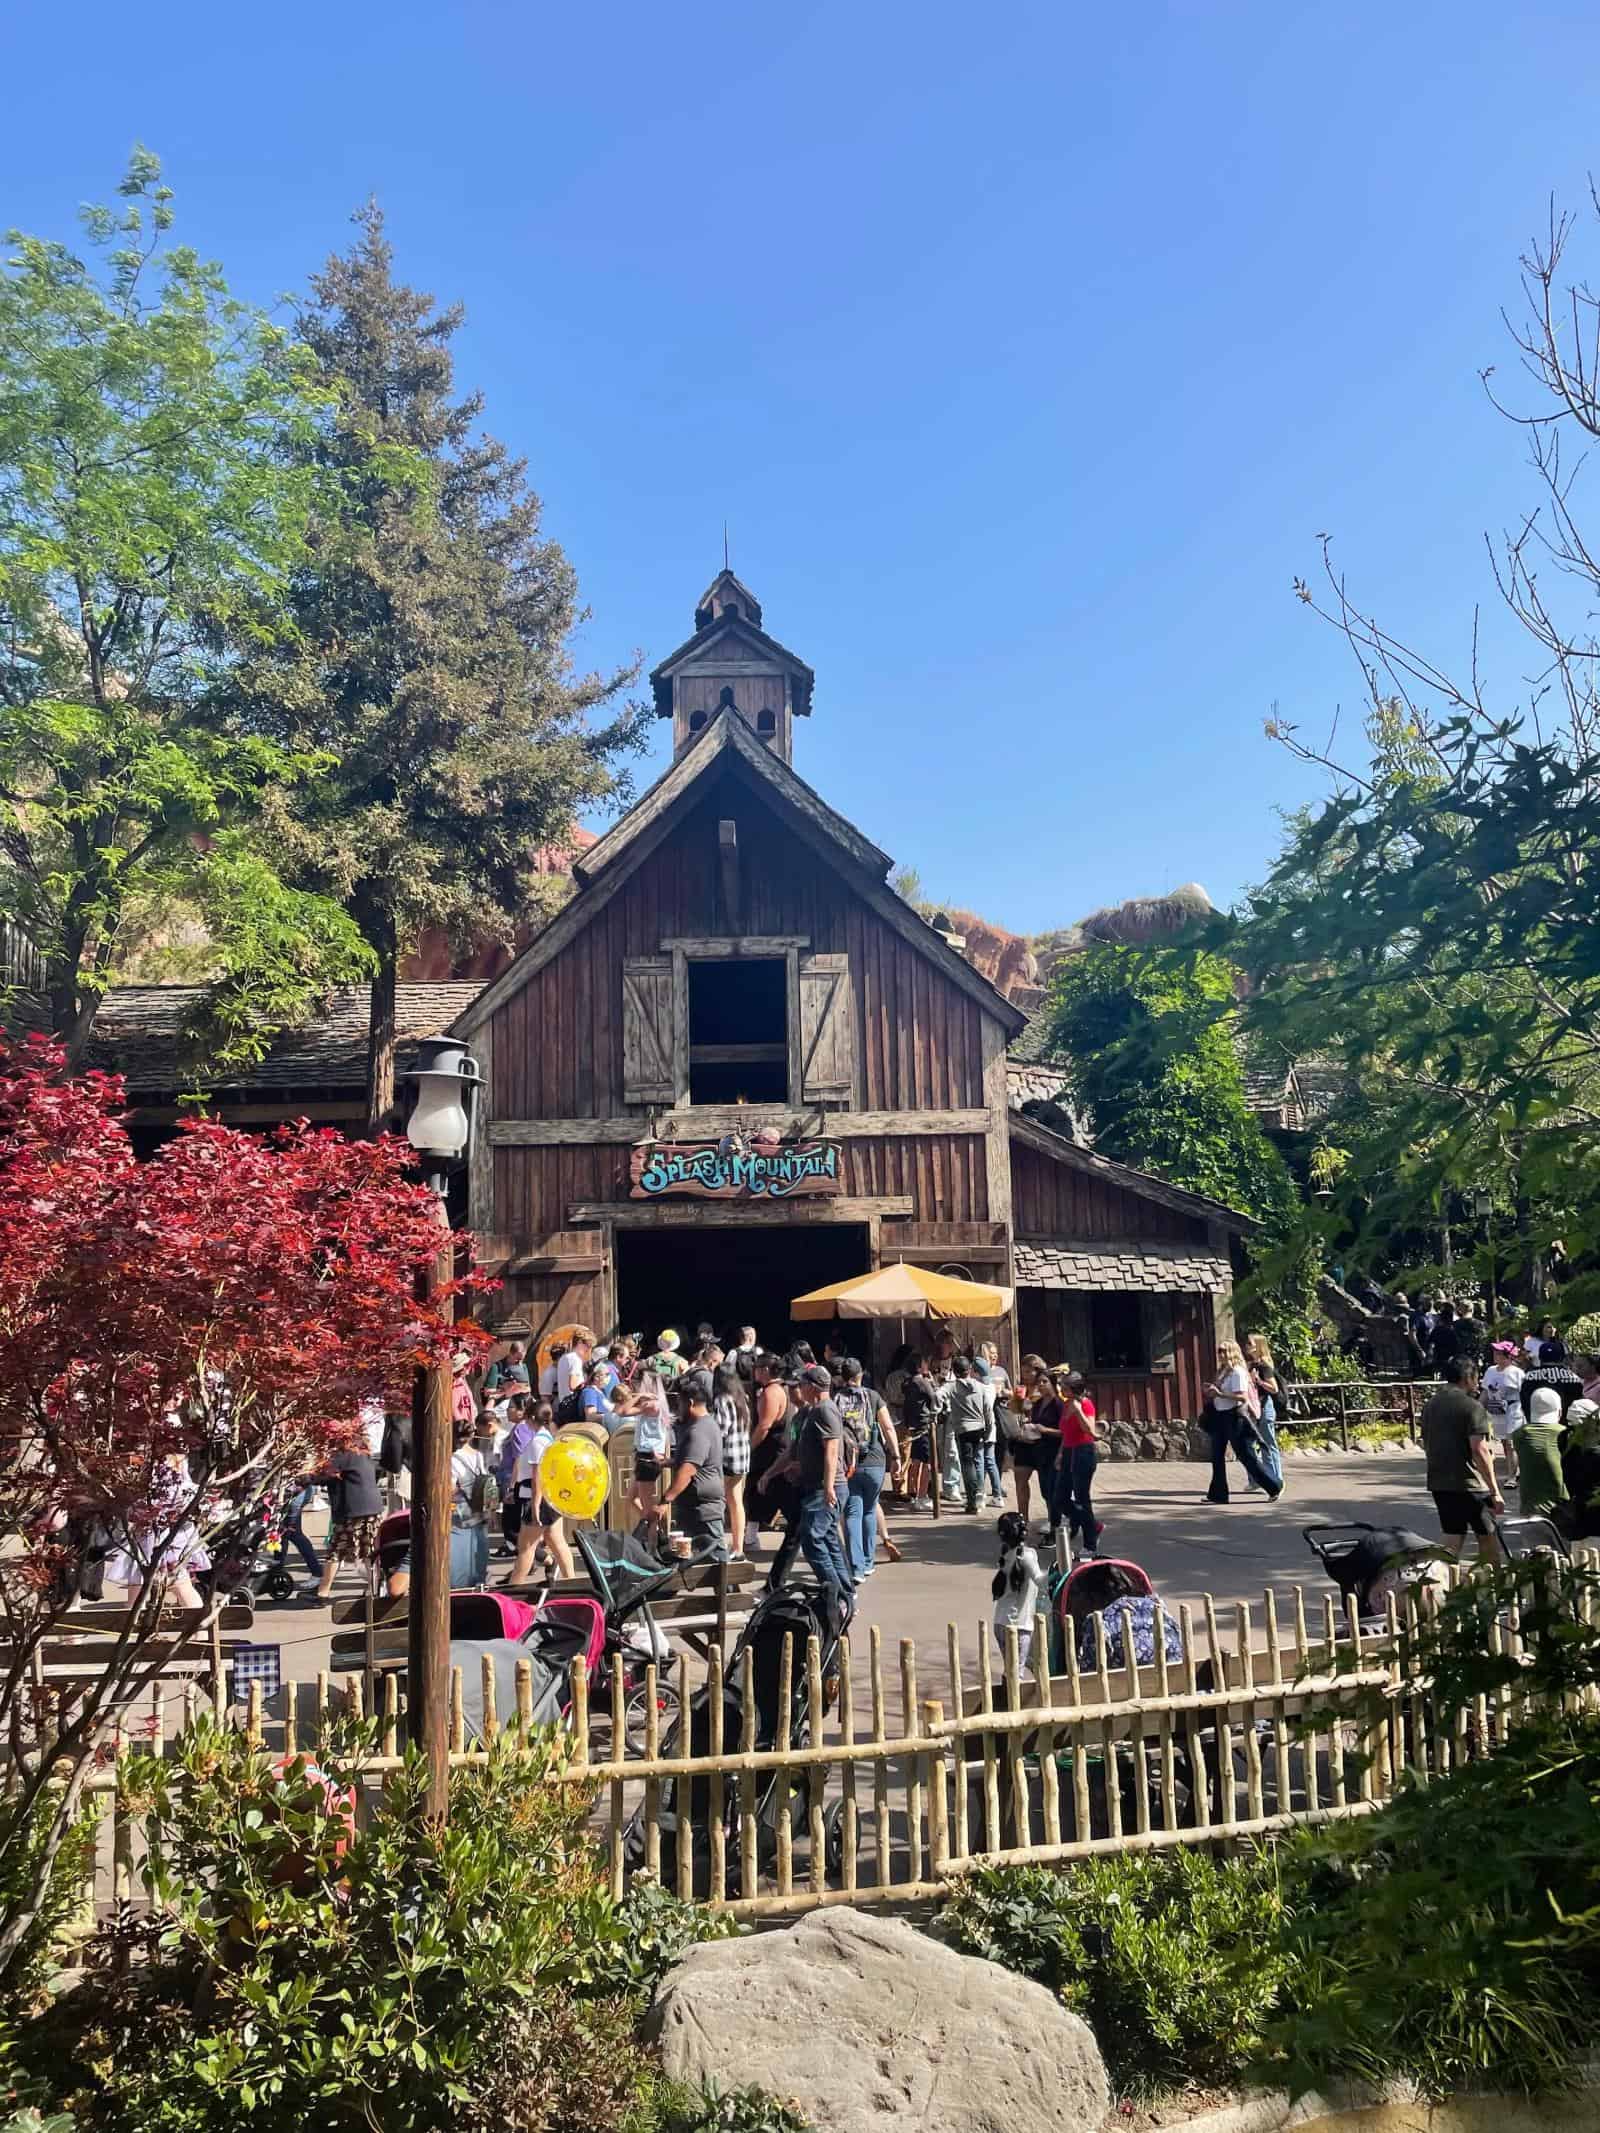 ULTIMATE Guide to Disneyland Single Rider Lines - Is Splash Mountain scary?